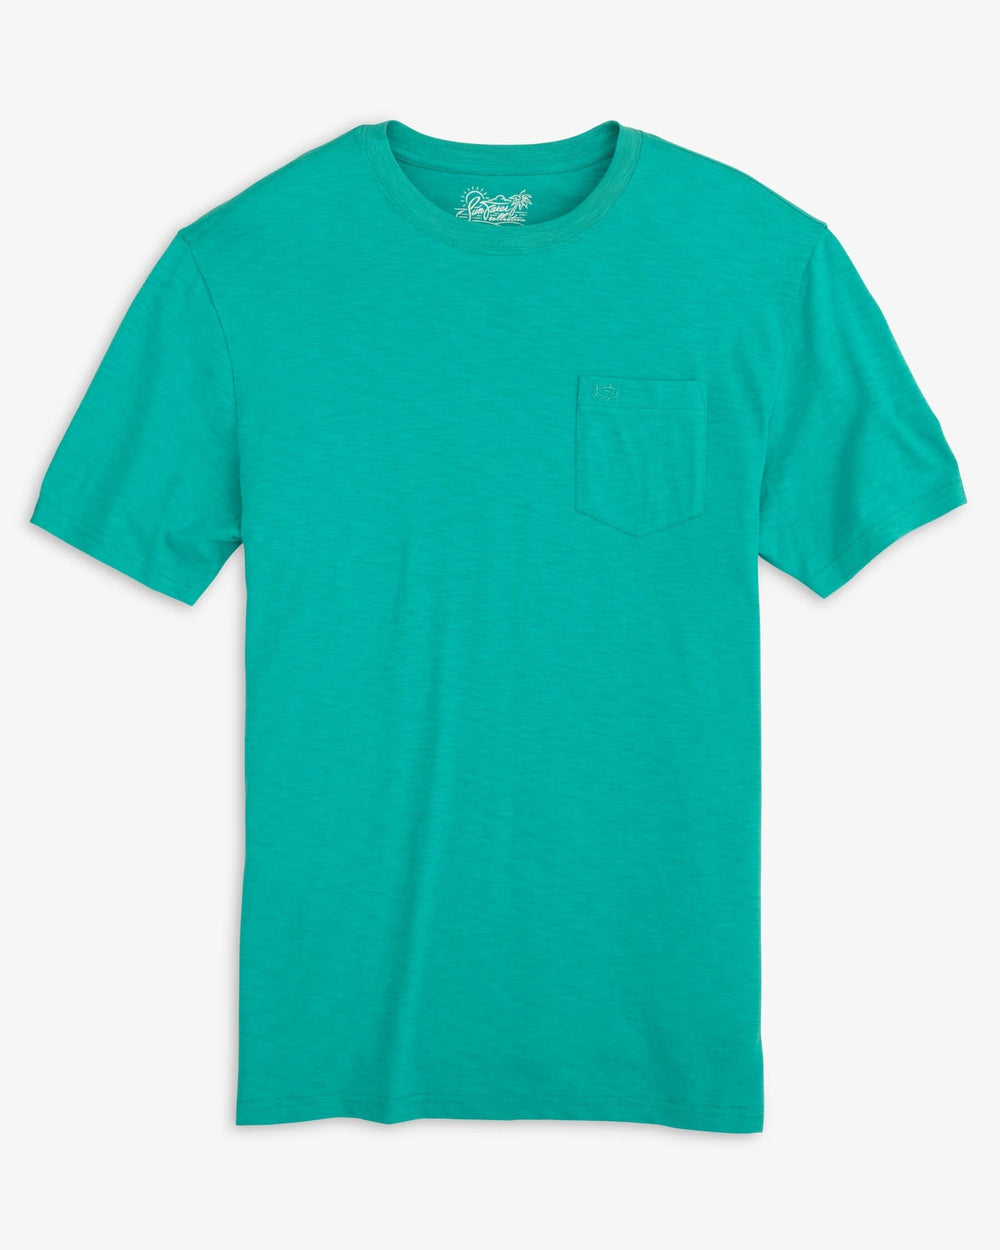 The front view of the Southern Tide Sun Farer Short Sleeve T-Shirt by Southern Tide - Tidal Wave